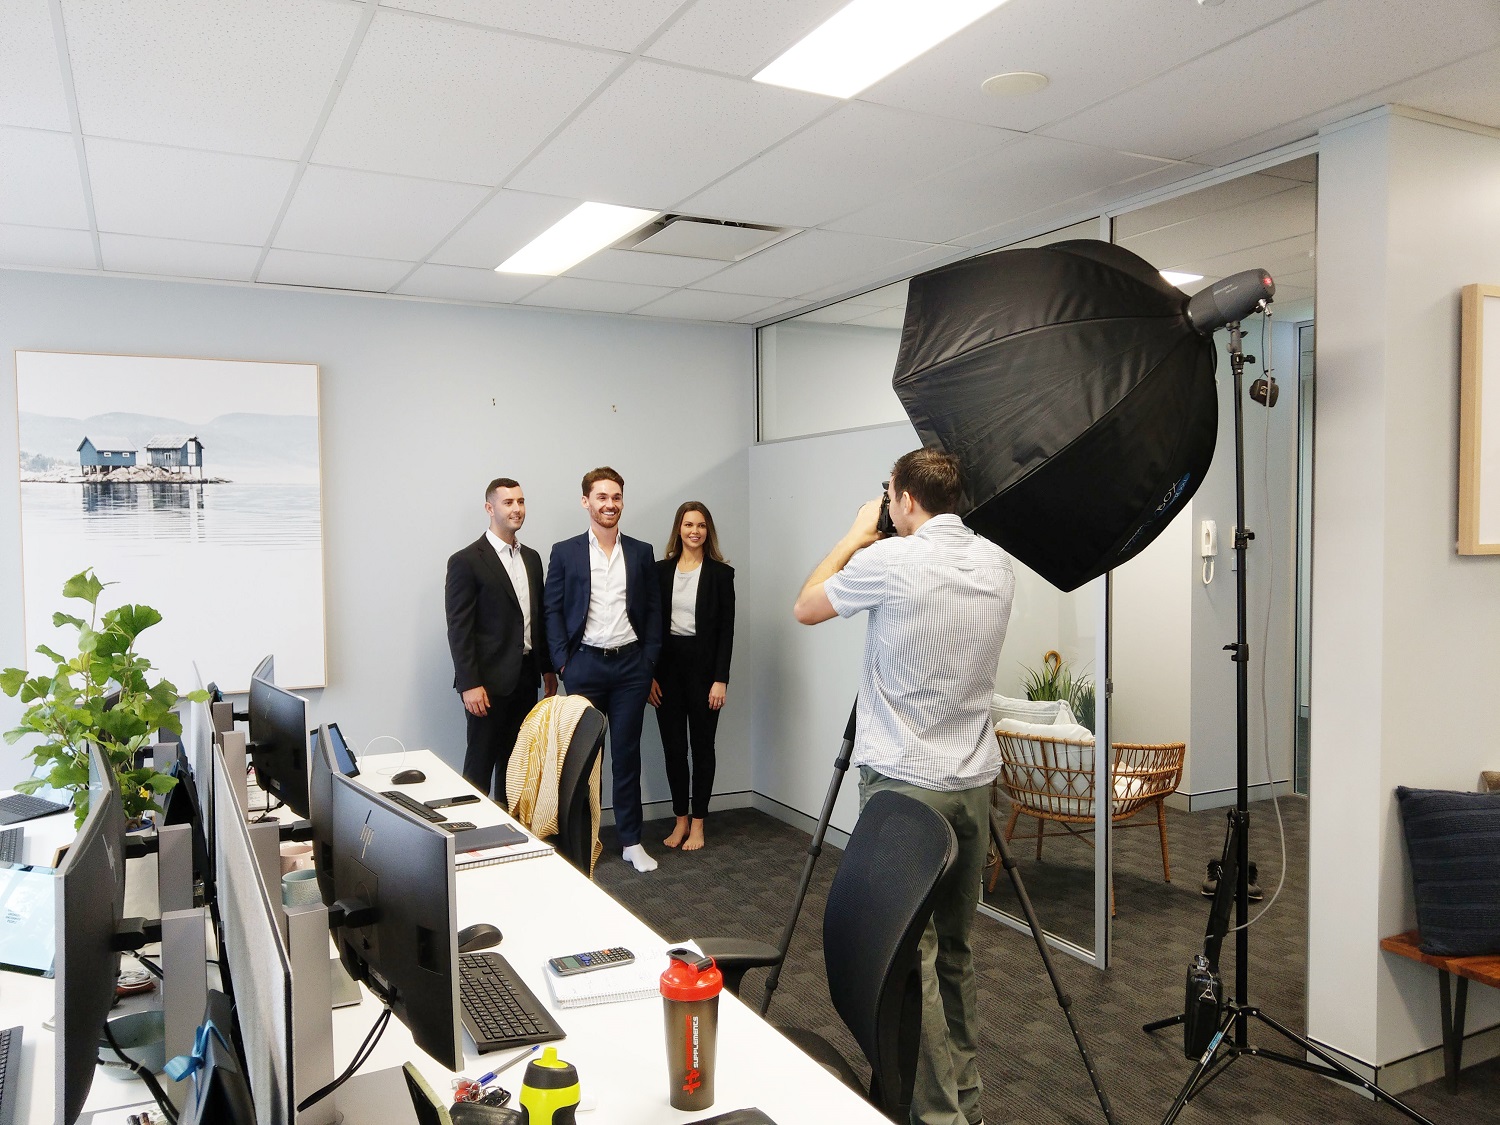 Corporate team photography behind the scenes in Norwest, Sydney.